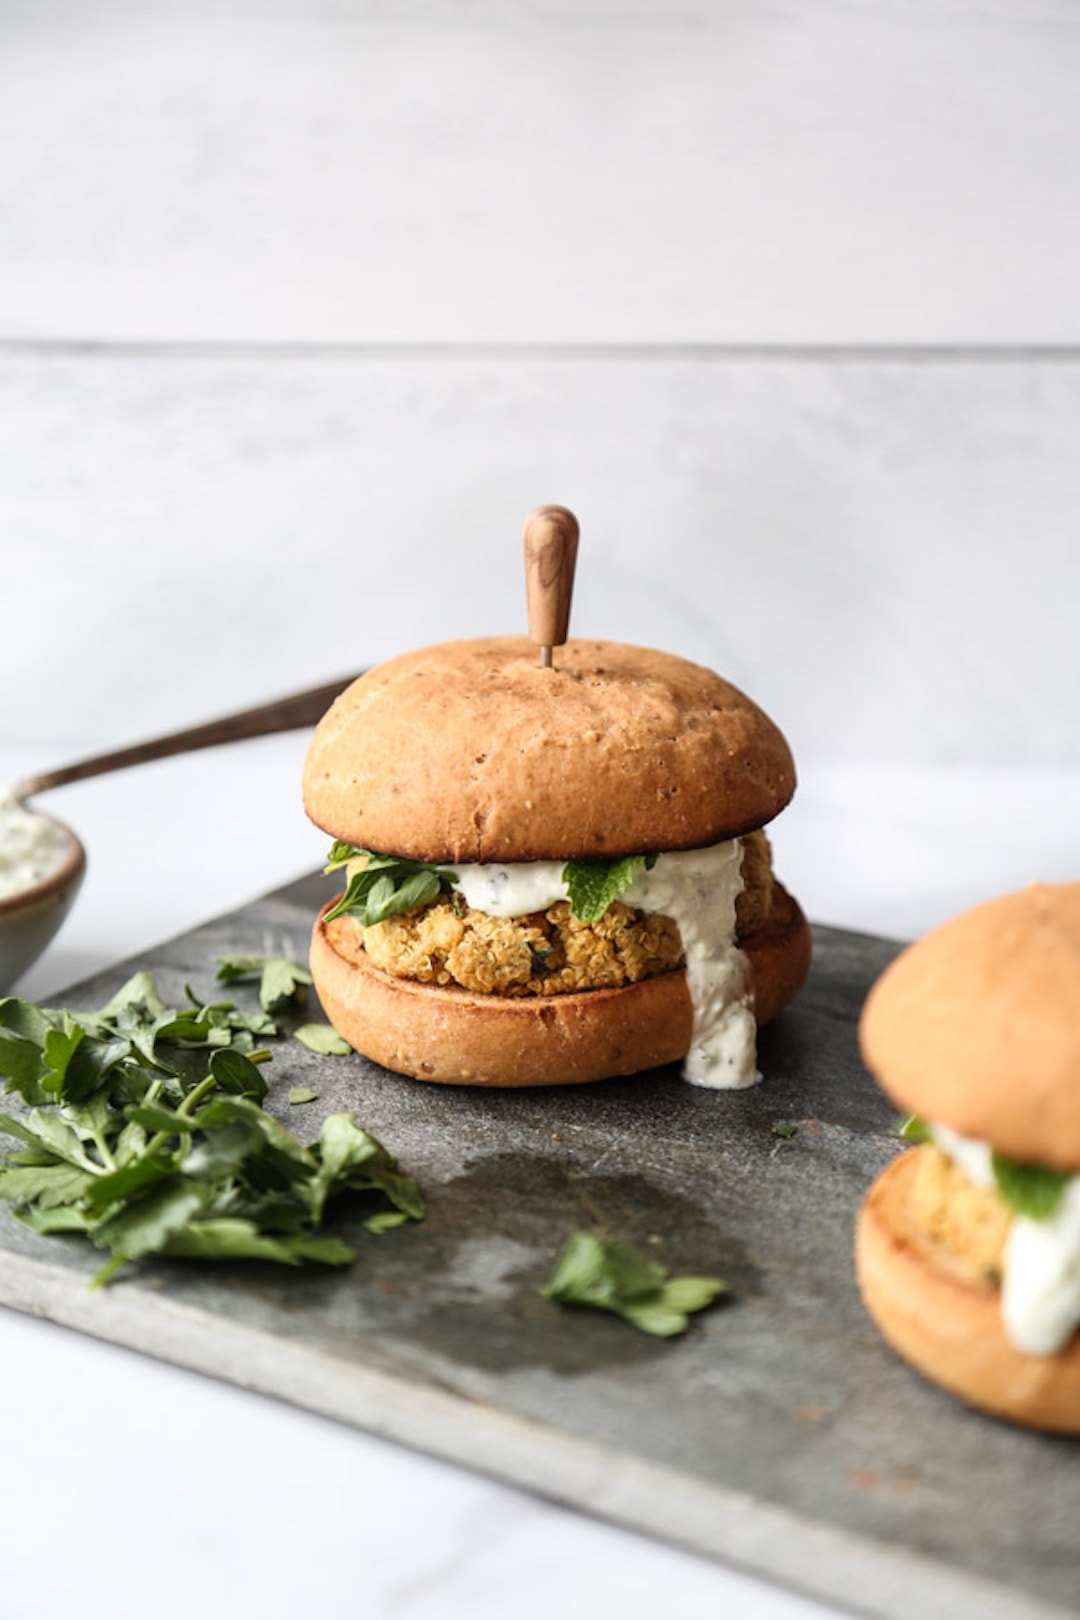 image of a chickpea burger topped with tatziki sauce sitting on a board with a white background